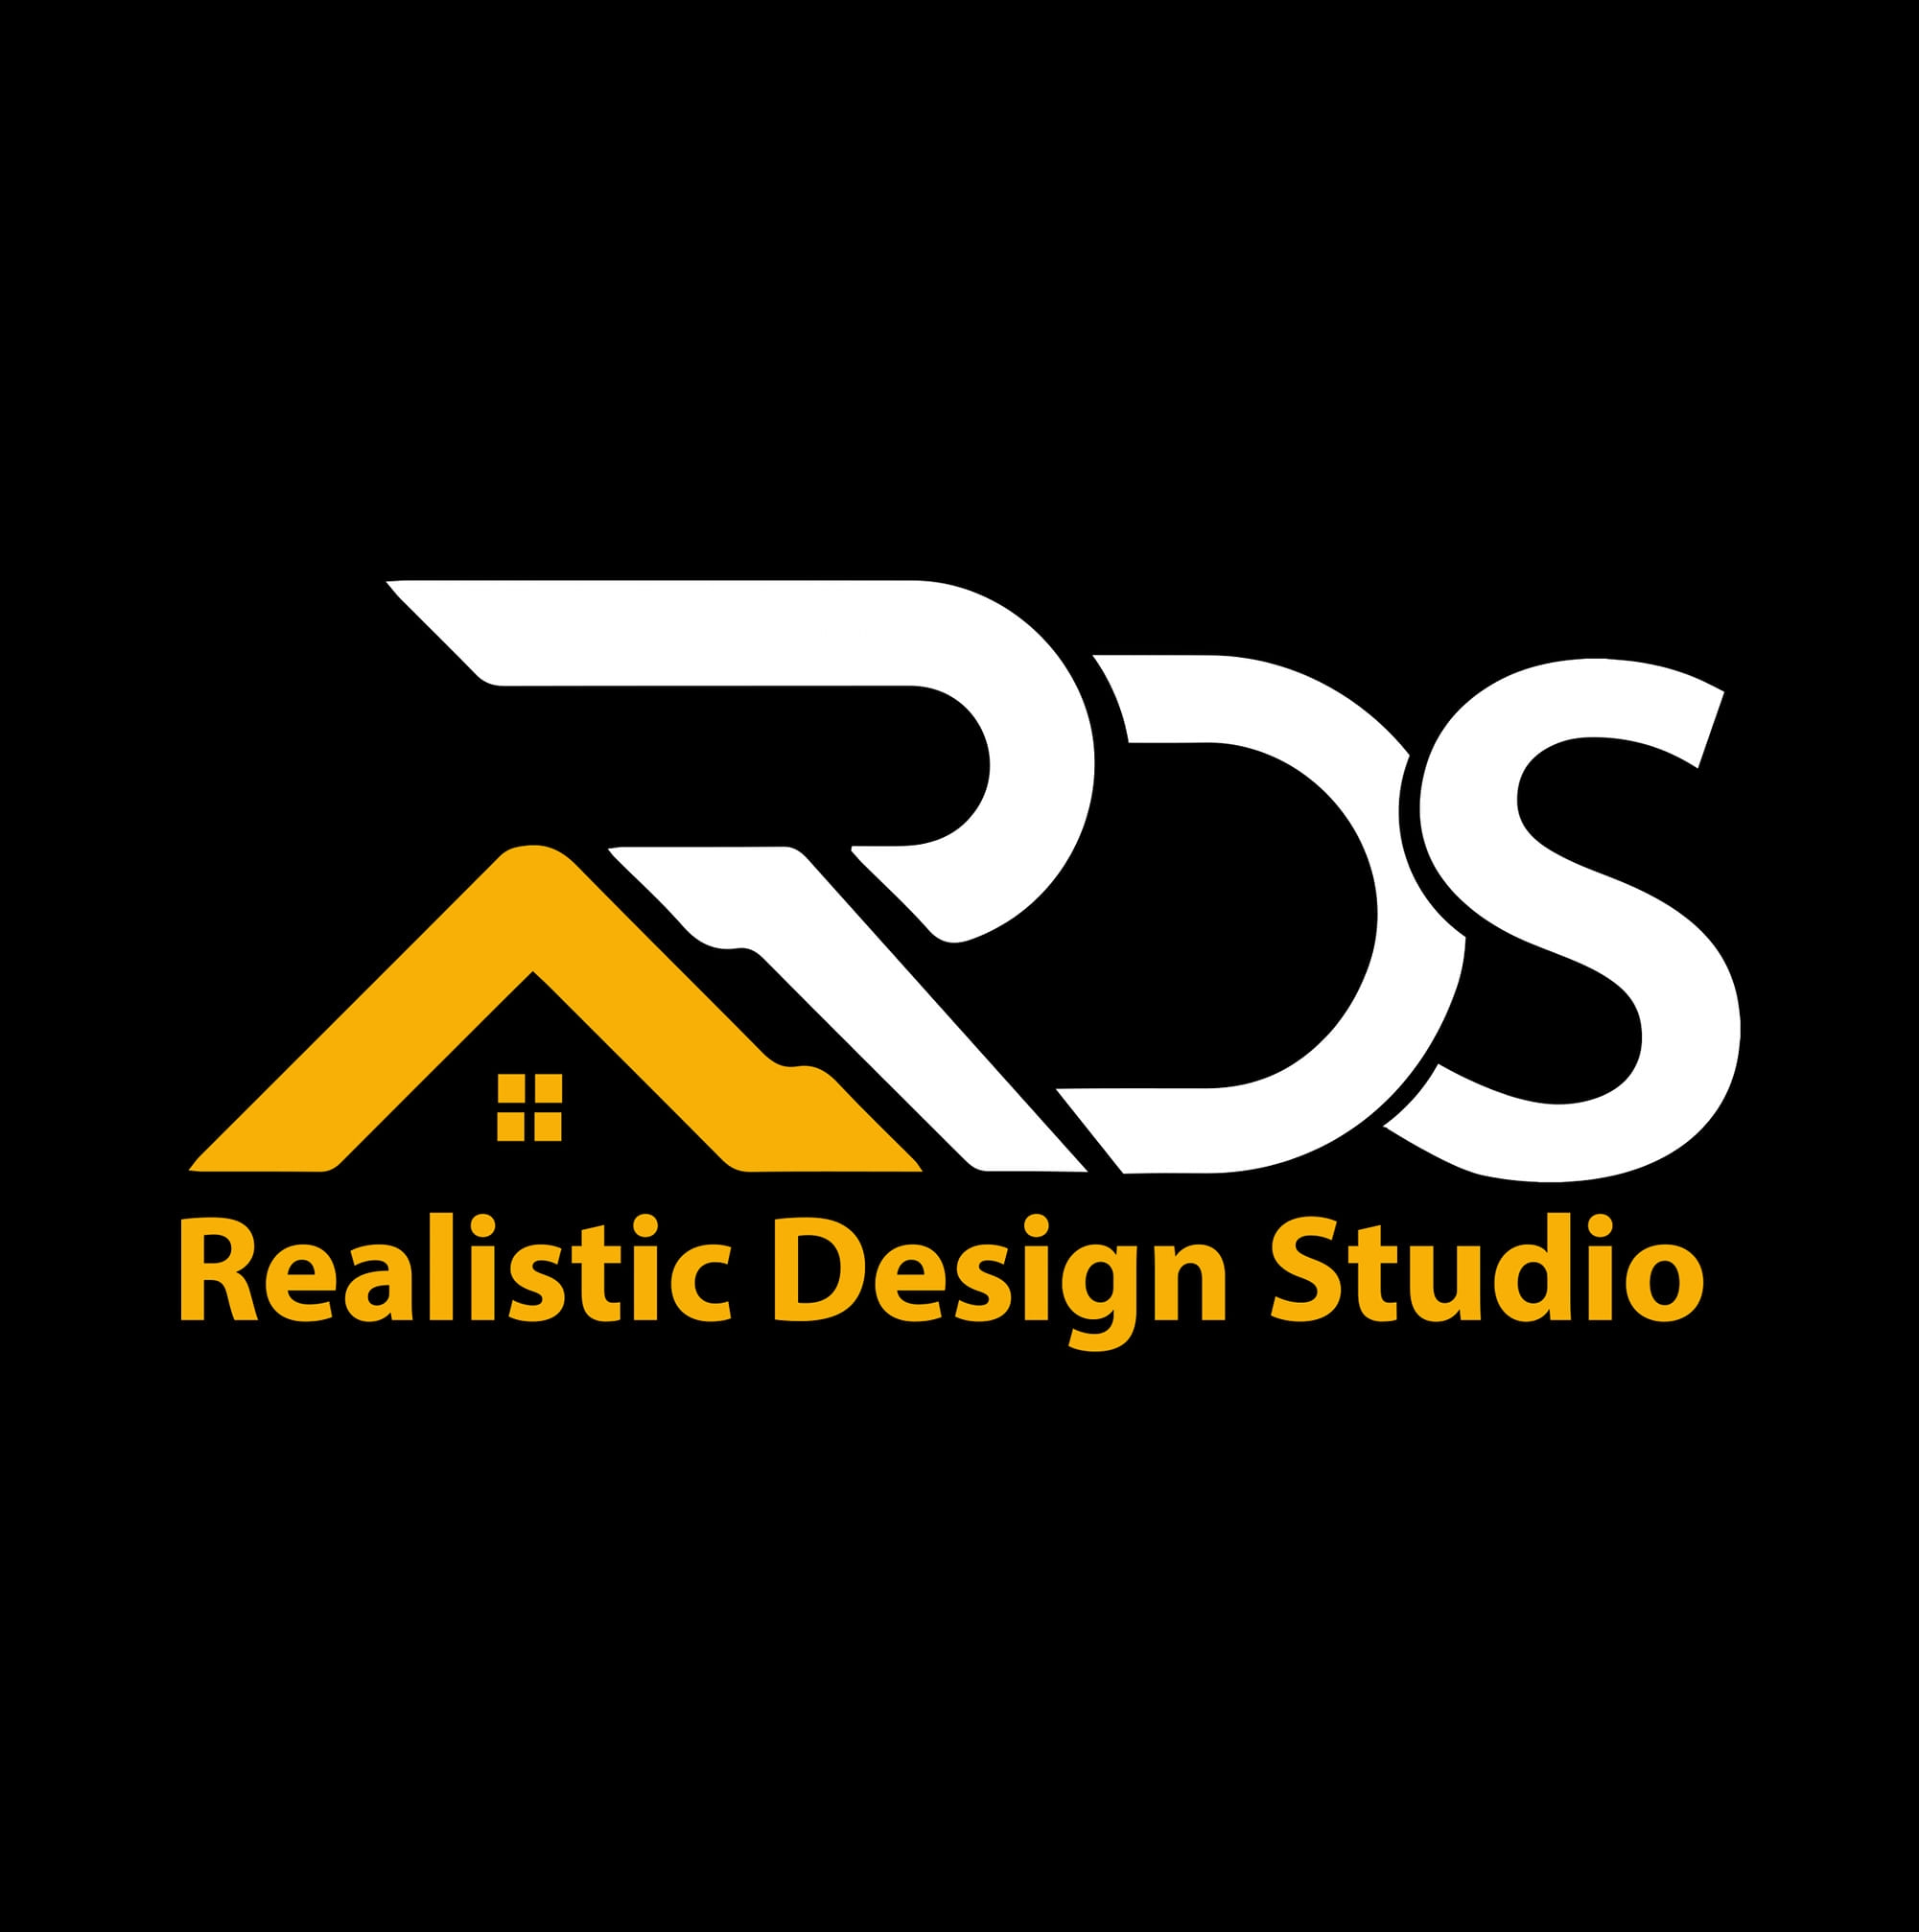 Realistic Design Studio|Accounting Services|Professional Services